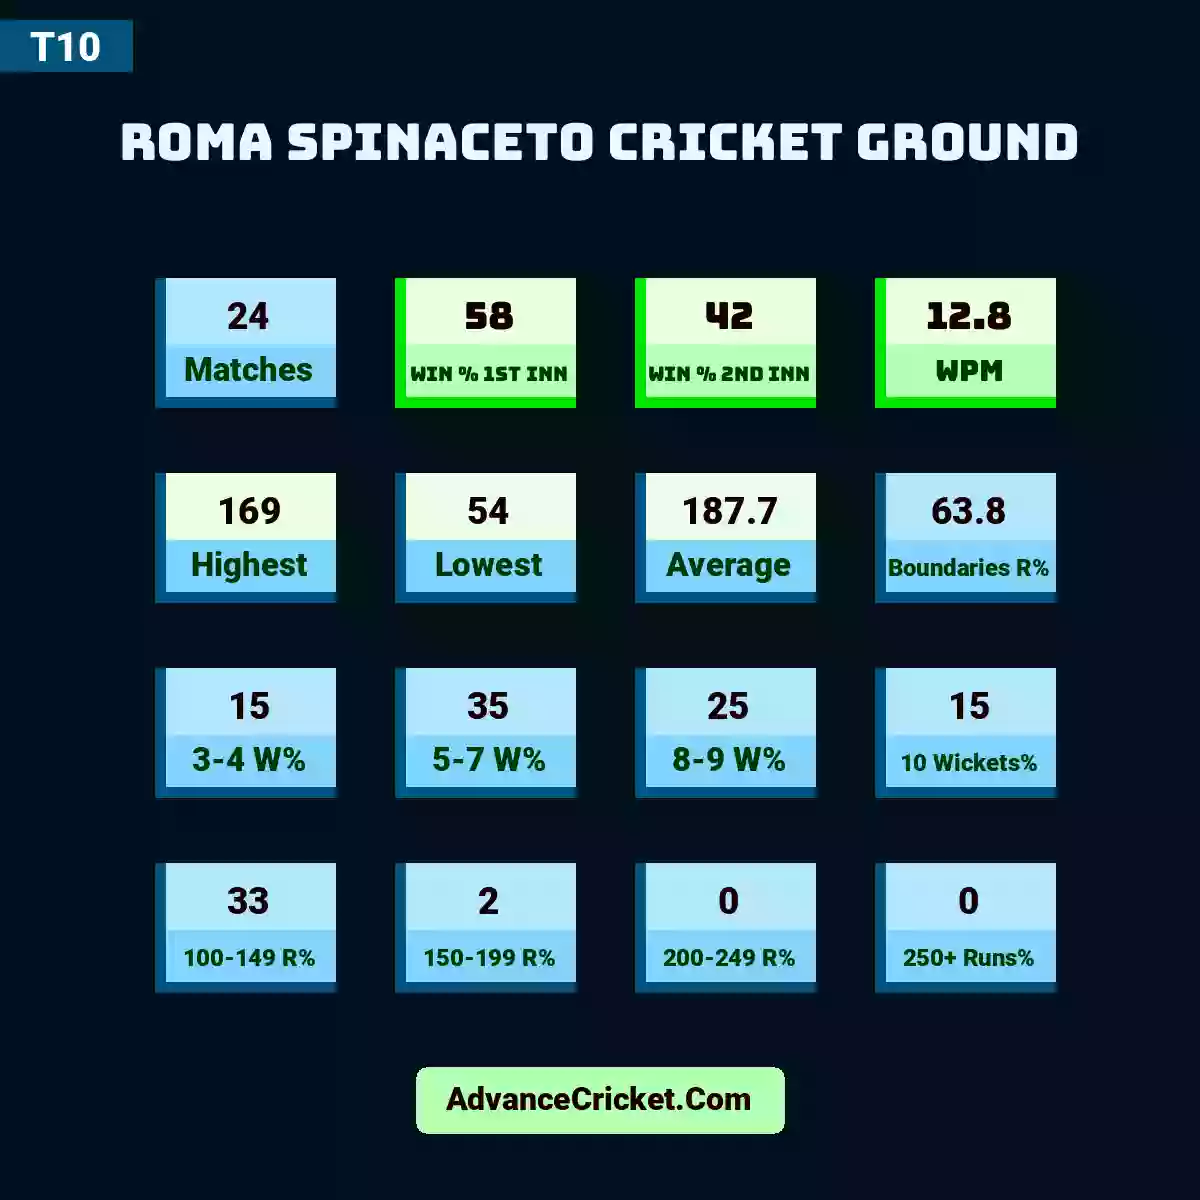 Image showing Roma Spinaceto Cricket Ground with Matches: 24, Win % 1st Inn: 58, Win % 2nd Inn: 42, WPM: 12.8, Highest: 169, Lowest: 54, Average: 187.7, Boundaries R%: 63.8, 3-4 W%: 15, 5-7 W%: 35, 8-9 W%: 25, 10 Wickets%: 15, 100-149 R%: 33, 150-199 R%: 2, 200-249 R%: 0, 250+ Runs%: 0.